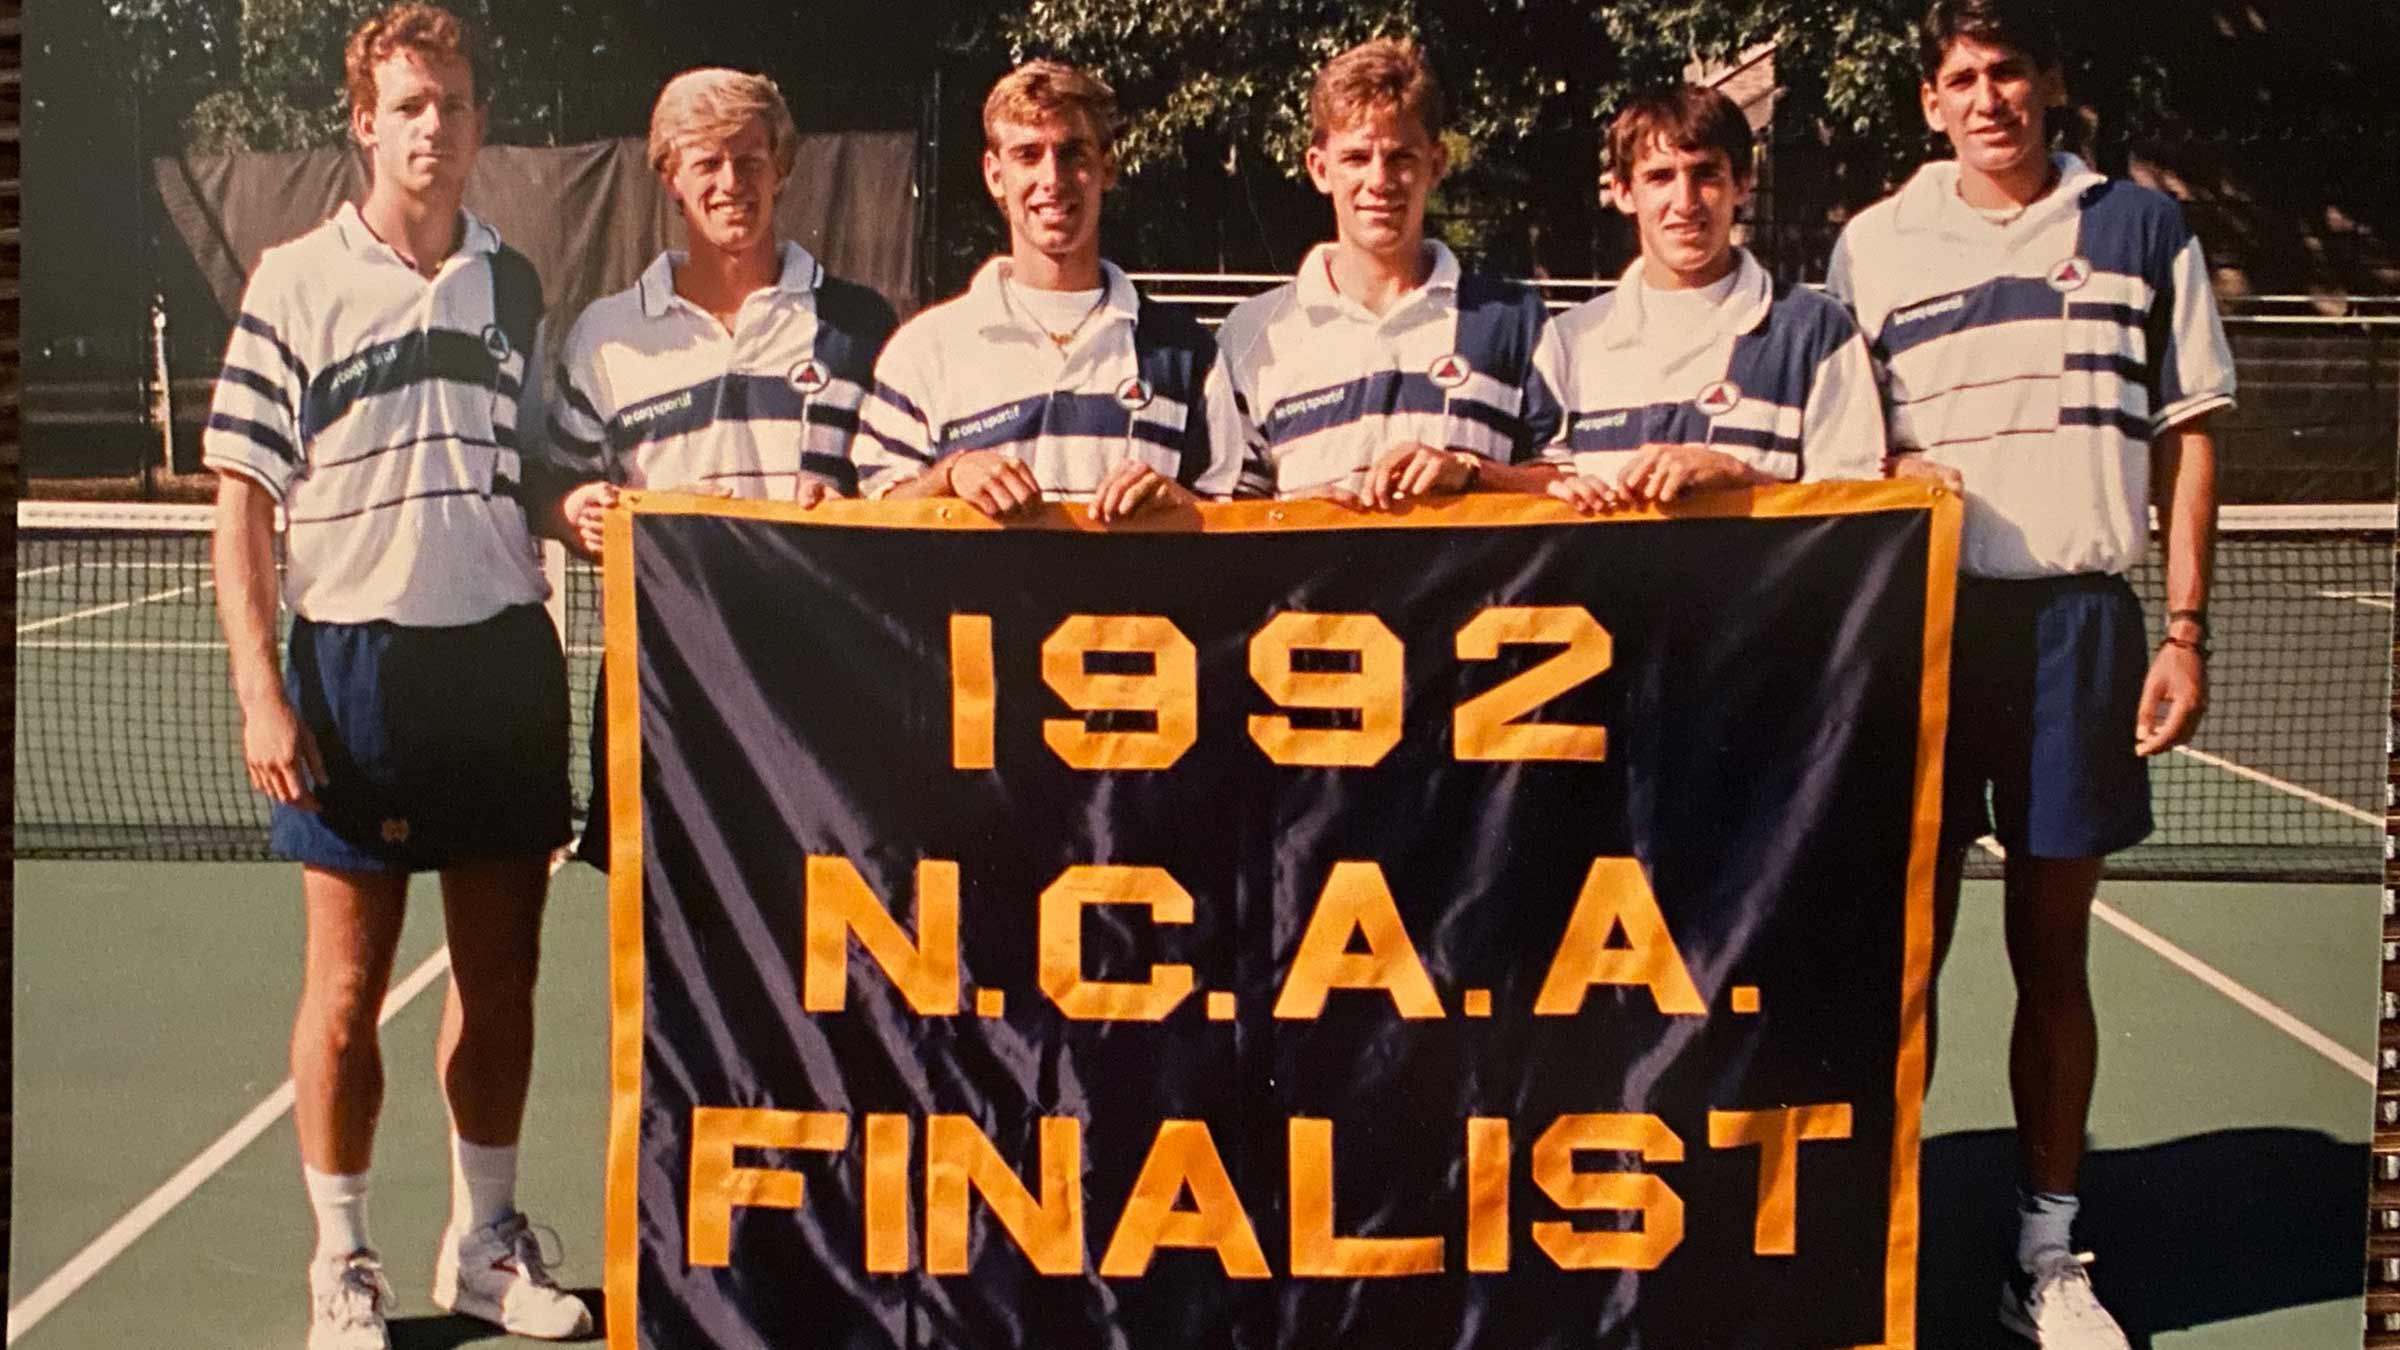 Ron Roses with his tennis team in 1992